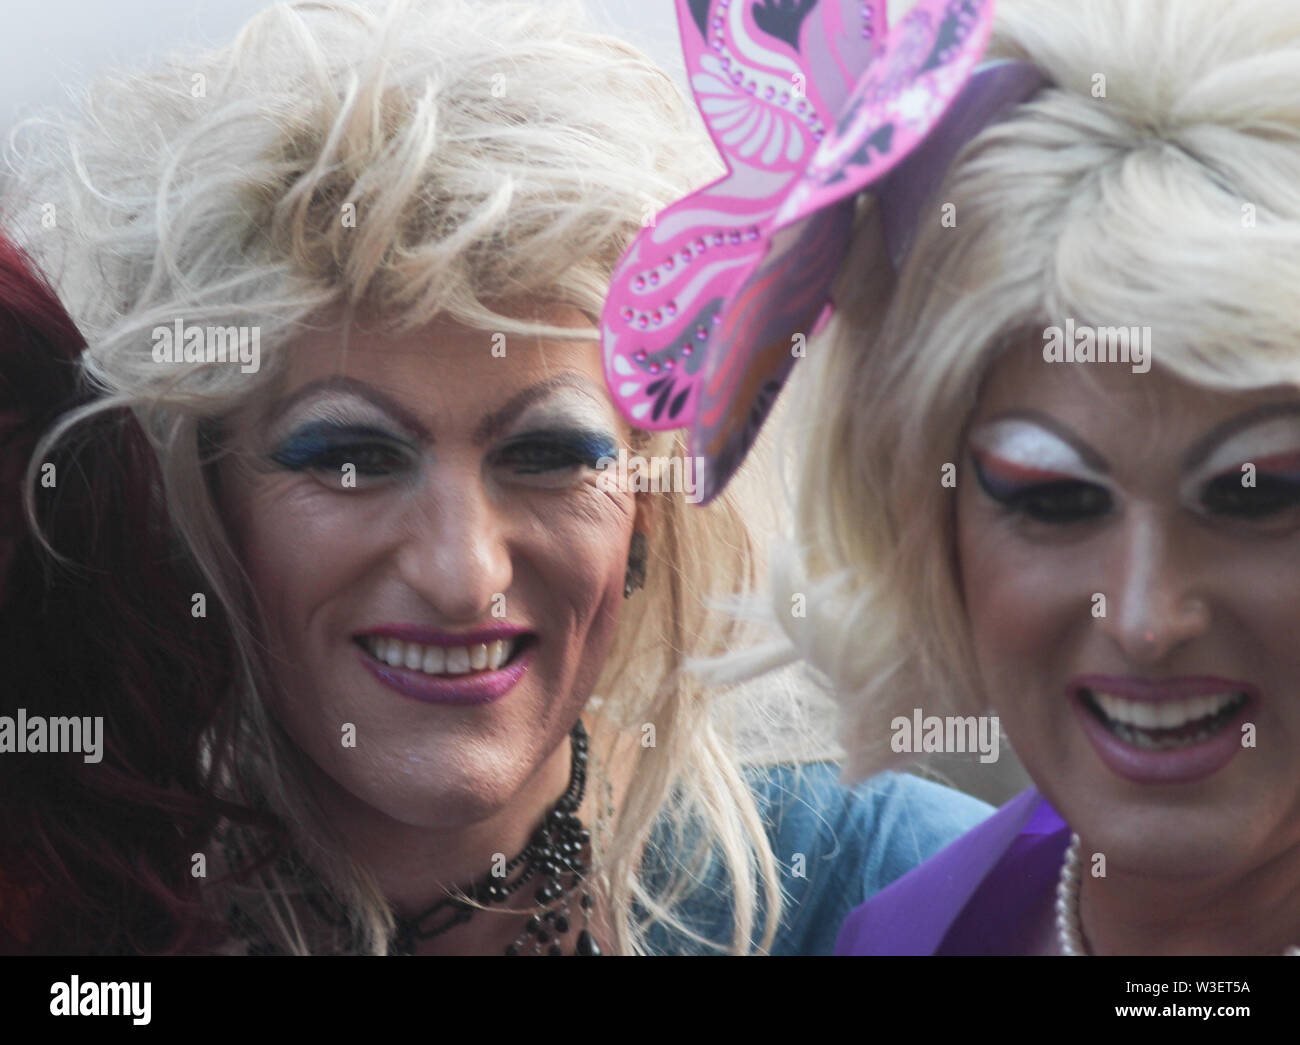 CSD - Christopher Street Day 2019 in Munich.  LGBT / Drag queen portraits. Stock Photo